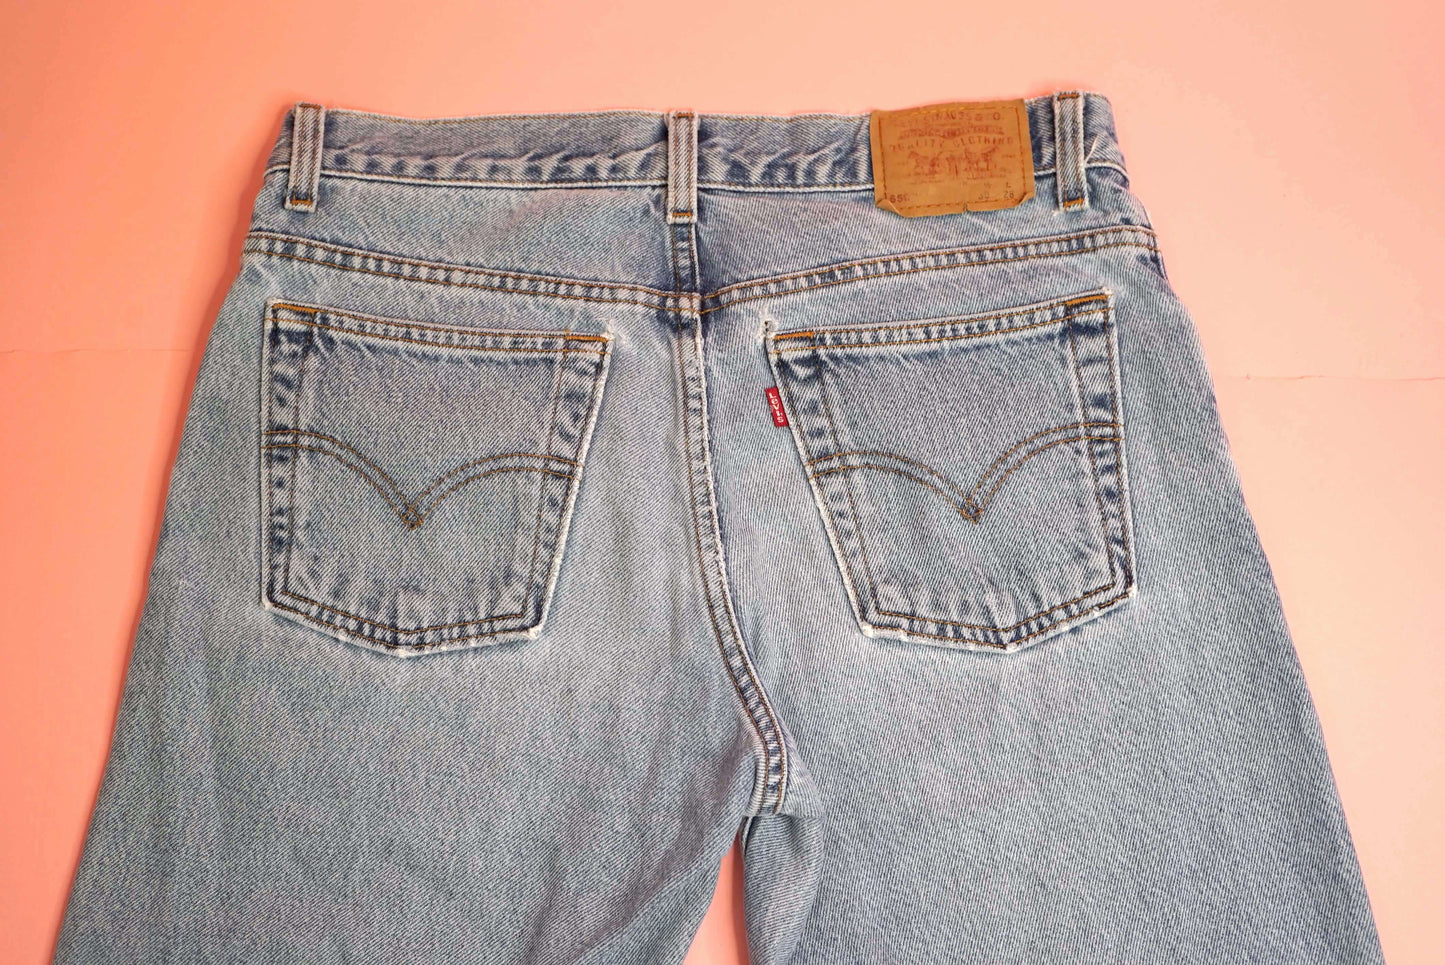 Vintage Levis 550 Husky Jeans W29-30 Ankle Length Relaxed Fit Light Blue